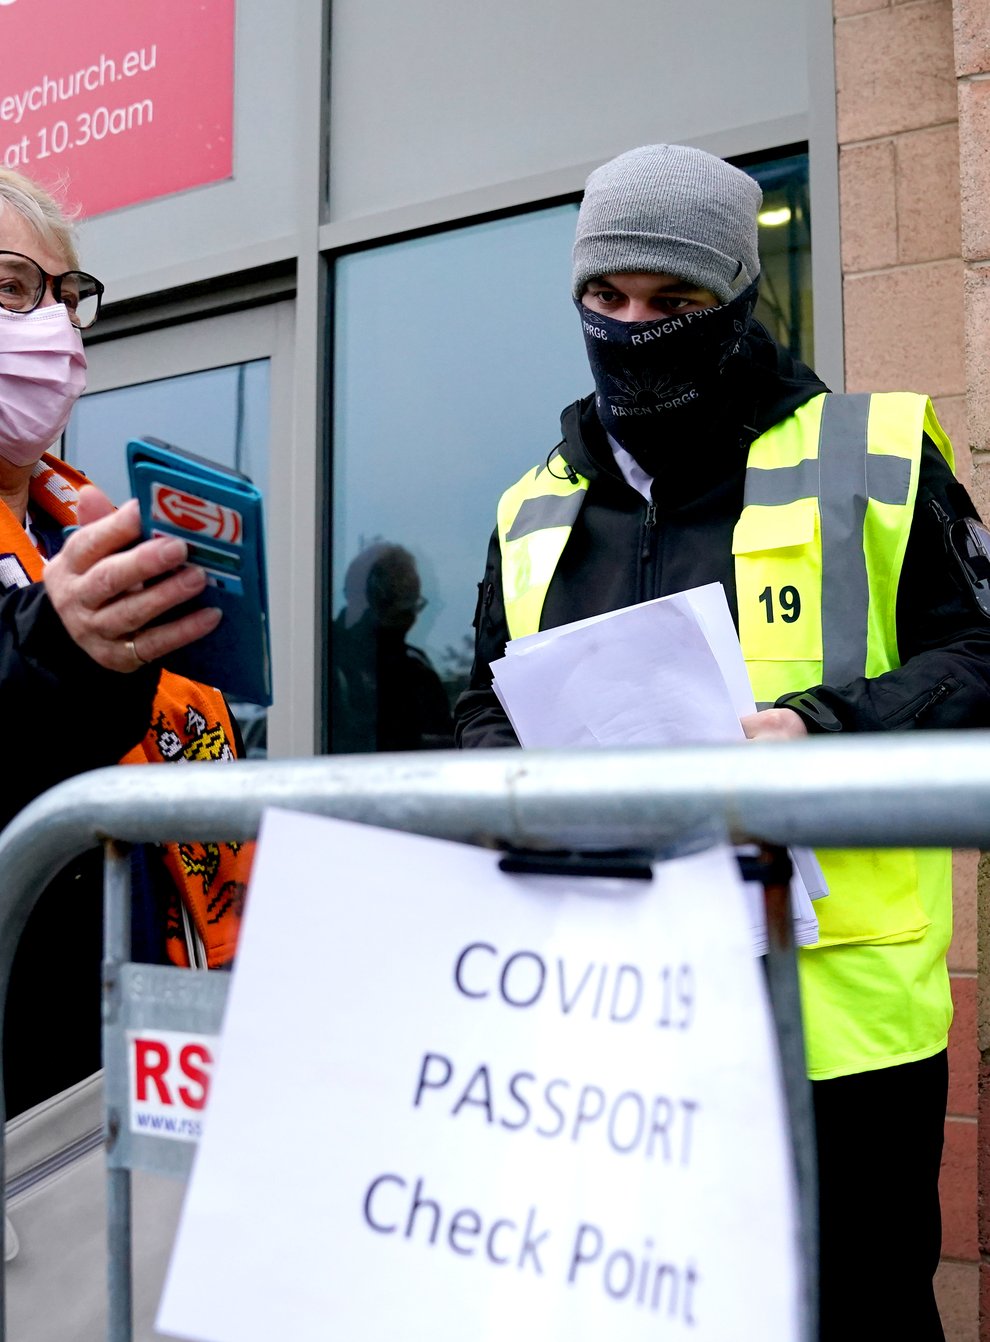 A Blackpool fan shows their Covid pass to a member of security staff at the Covid 19 passport check point ahead of the Sky Bet Championship match in Blackpool. (Martin Rickett/ PA)